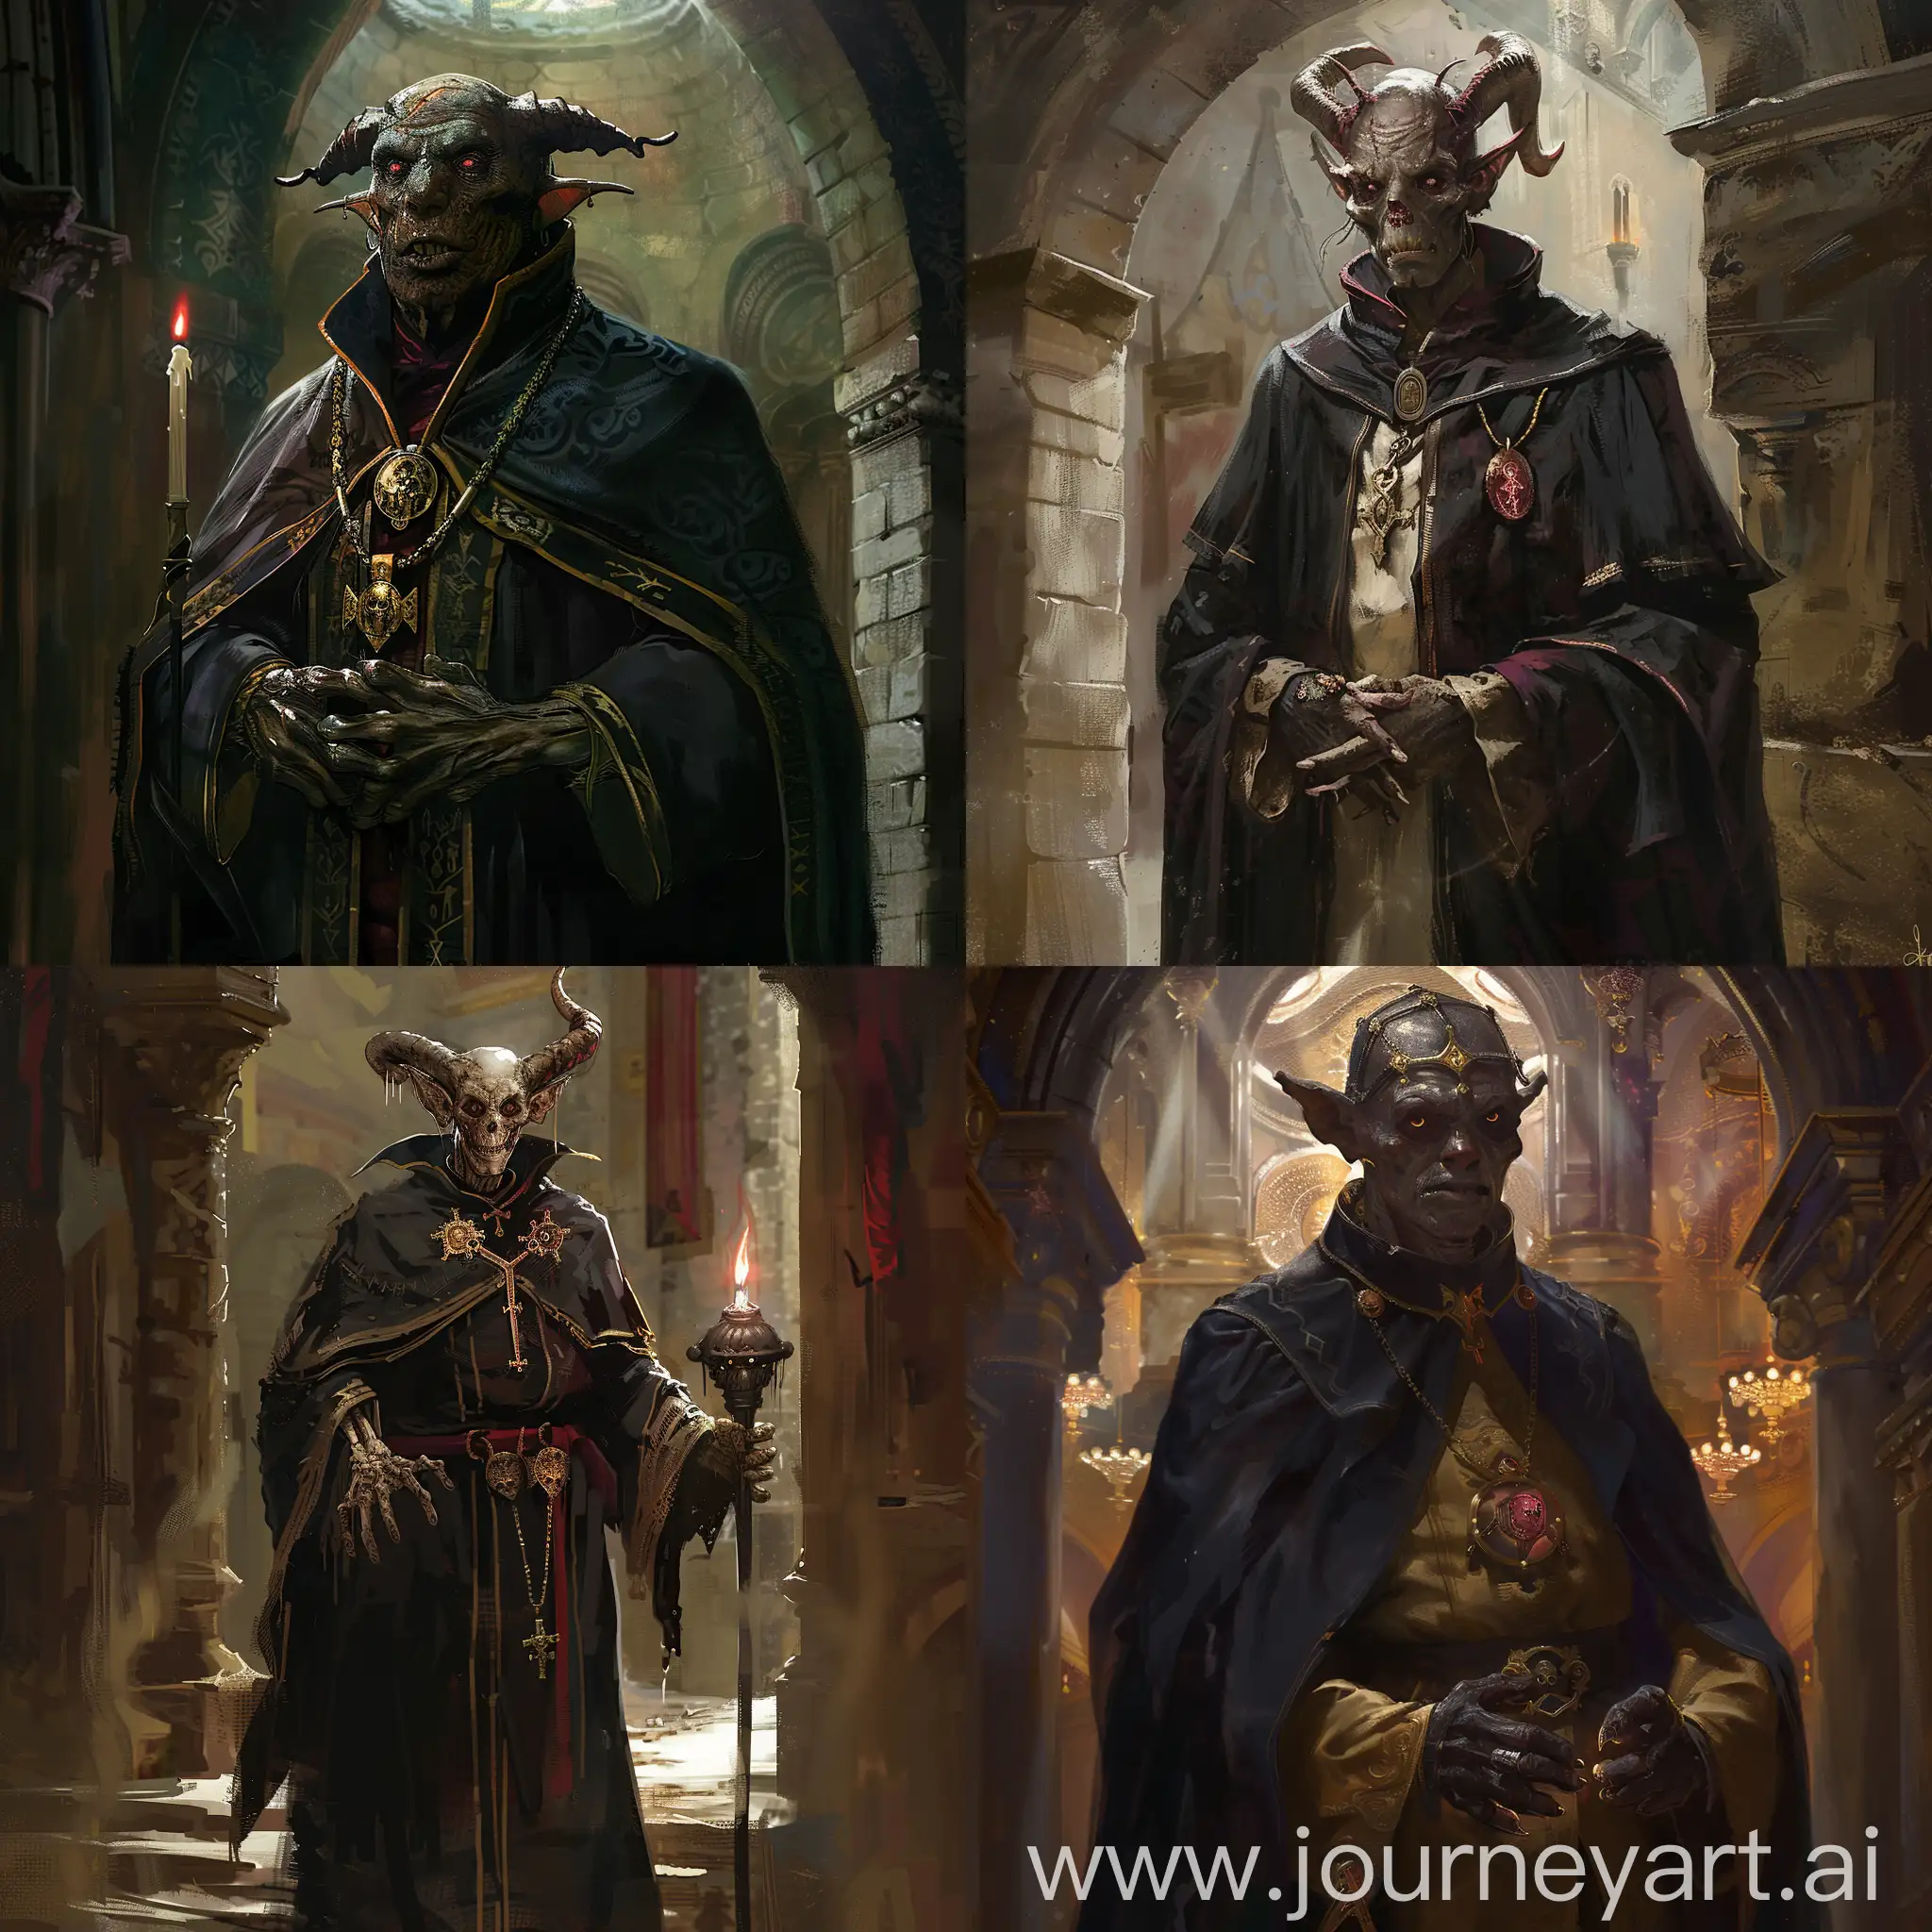 The Tiefling is an undead sorcerer in a cassock who trades in the temple